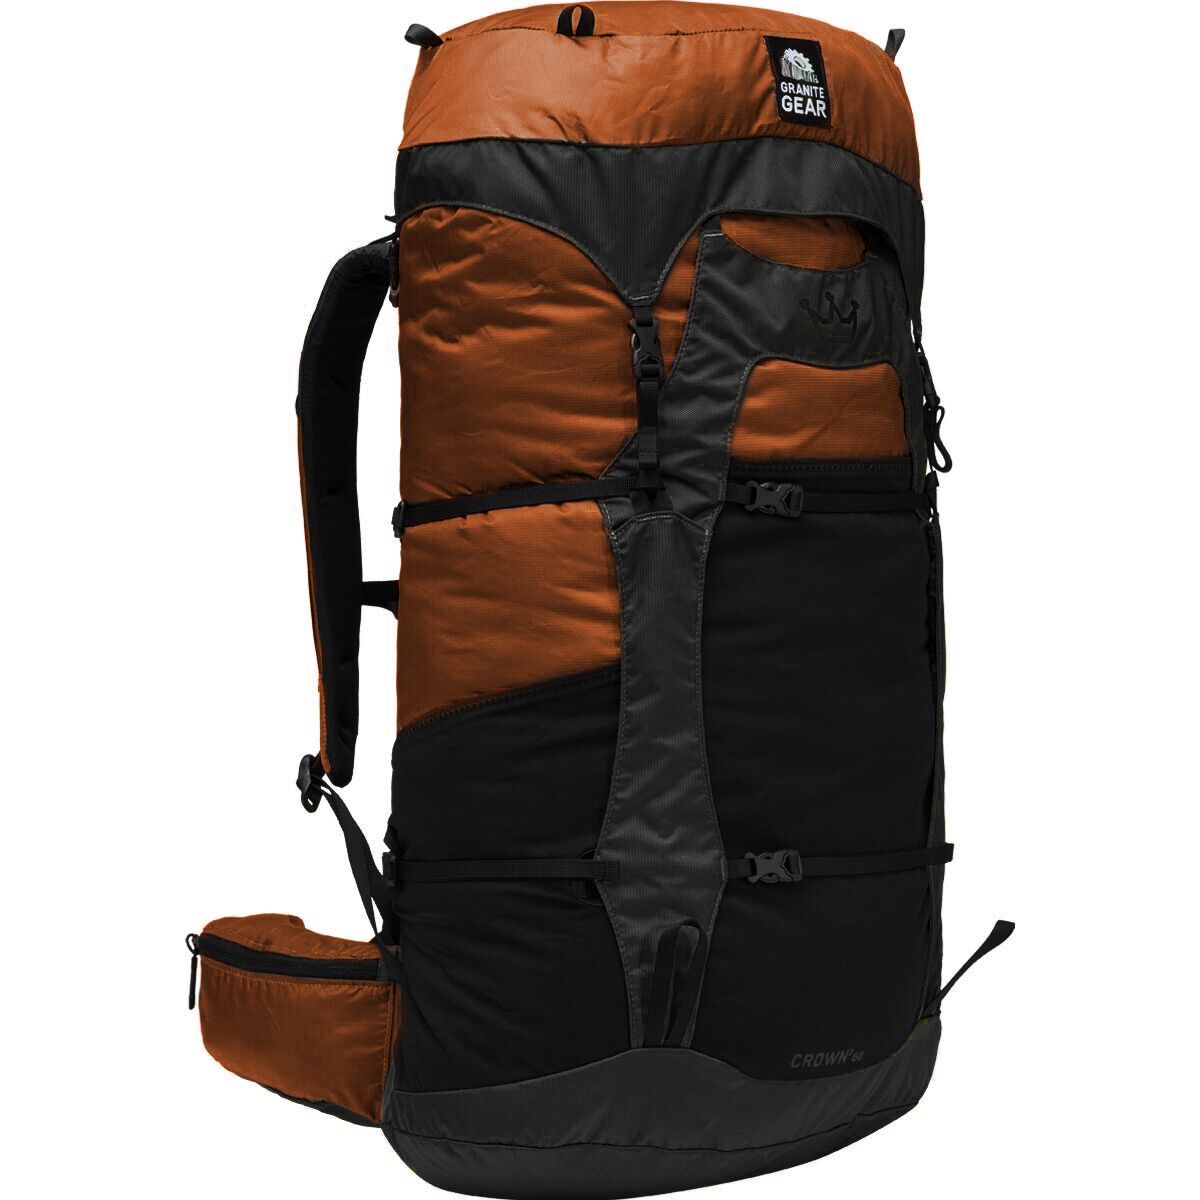 Granite Gear Crown 2 Limited Edition 60L Backpack